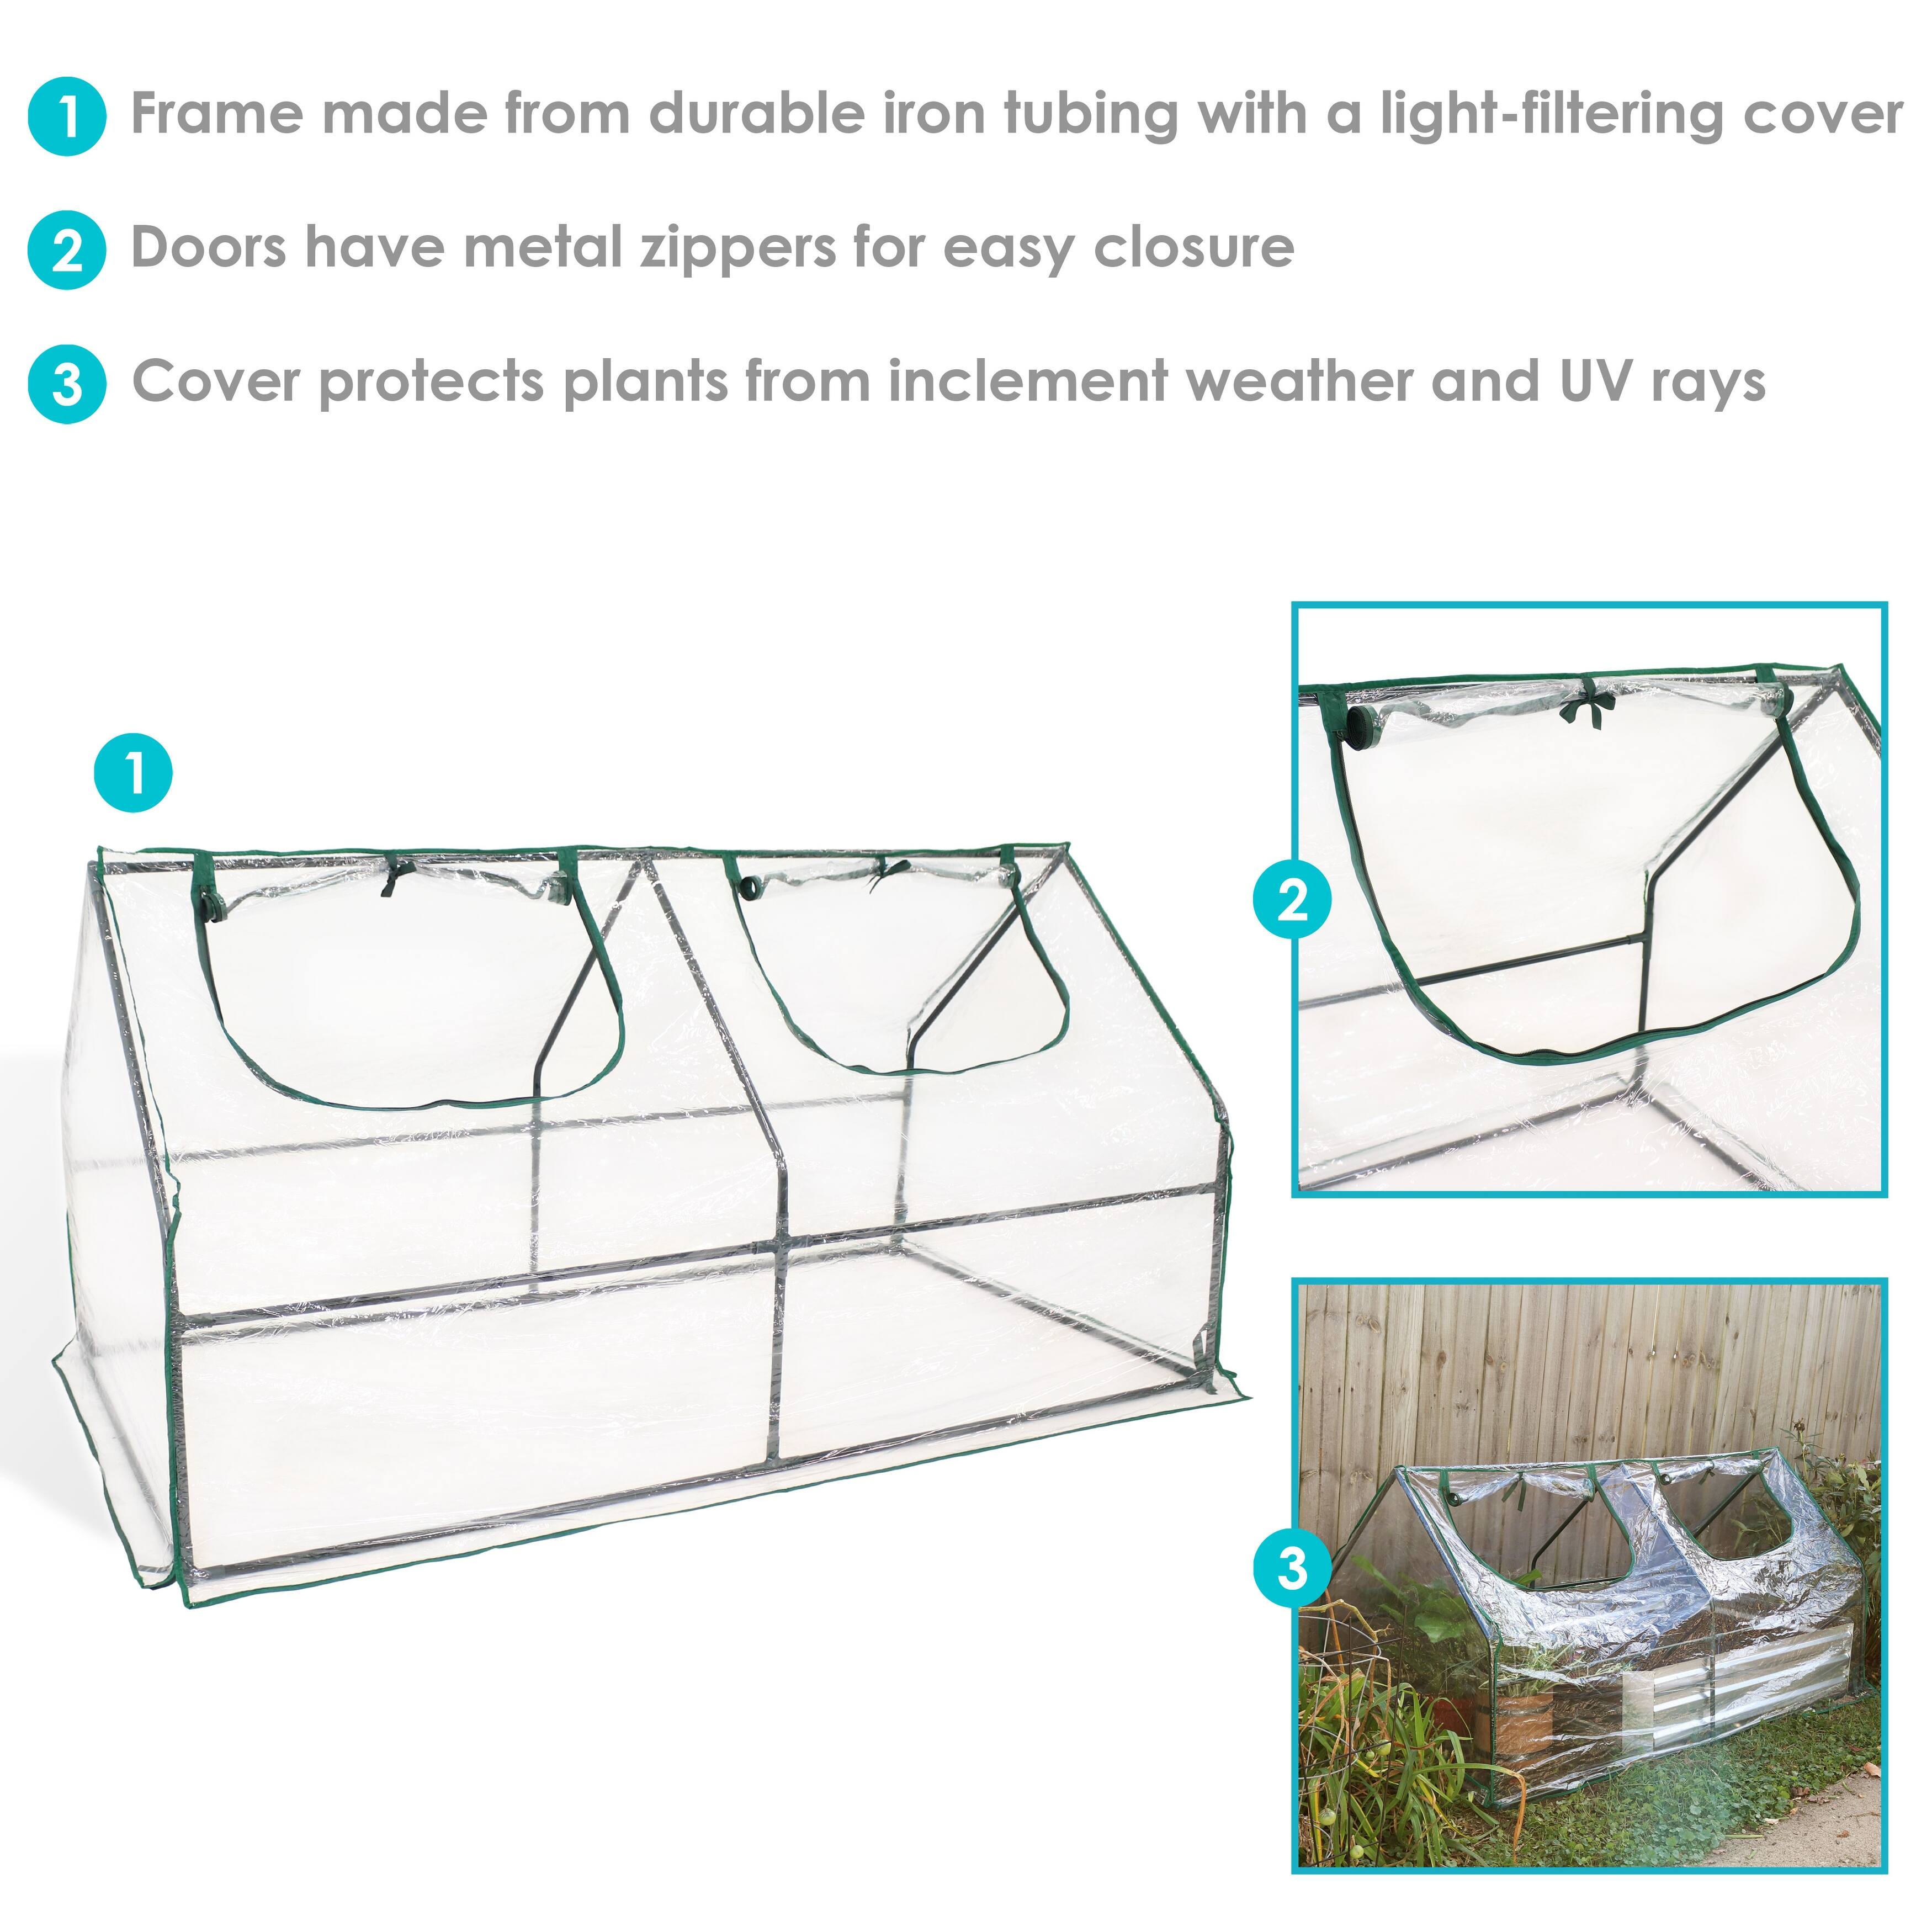 Sunnydaze Portable Mini Cloche Greenhouse with Zippered Doors - Clear